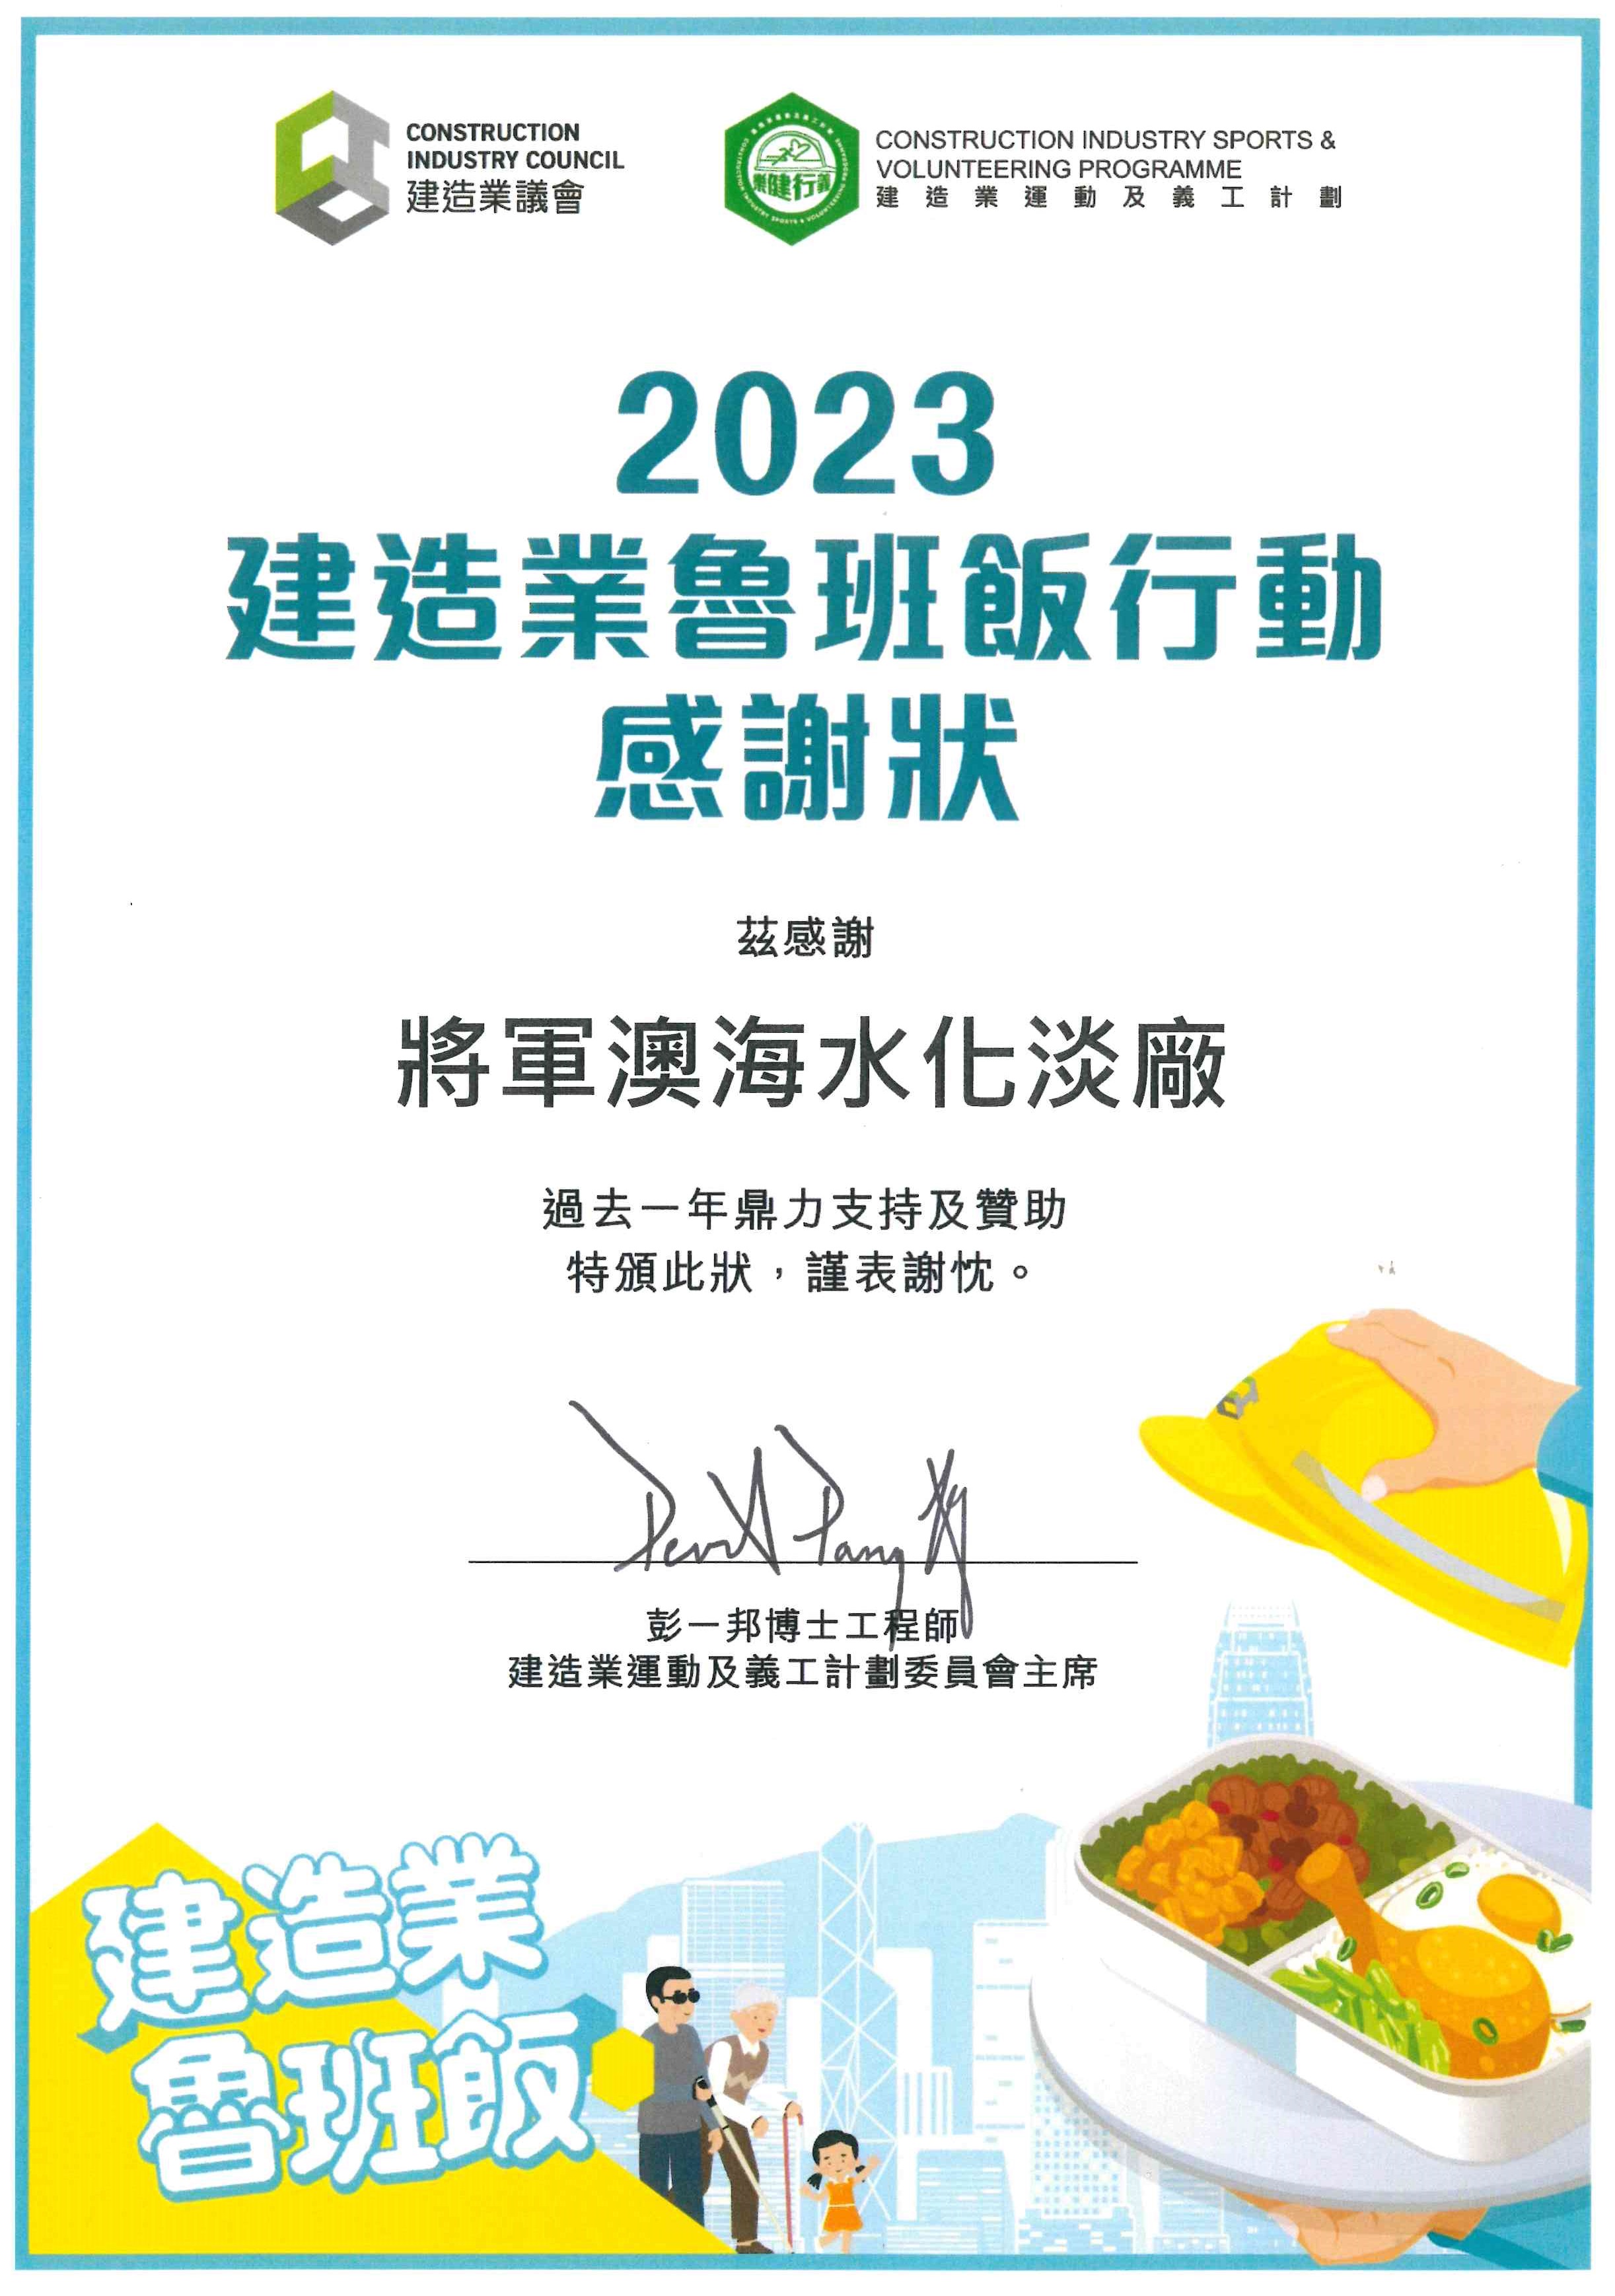 2023 Construction Industry<br />Lo Pan Rice Campaign